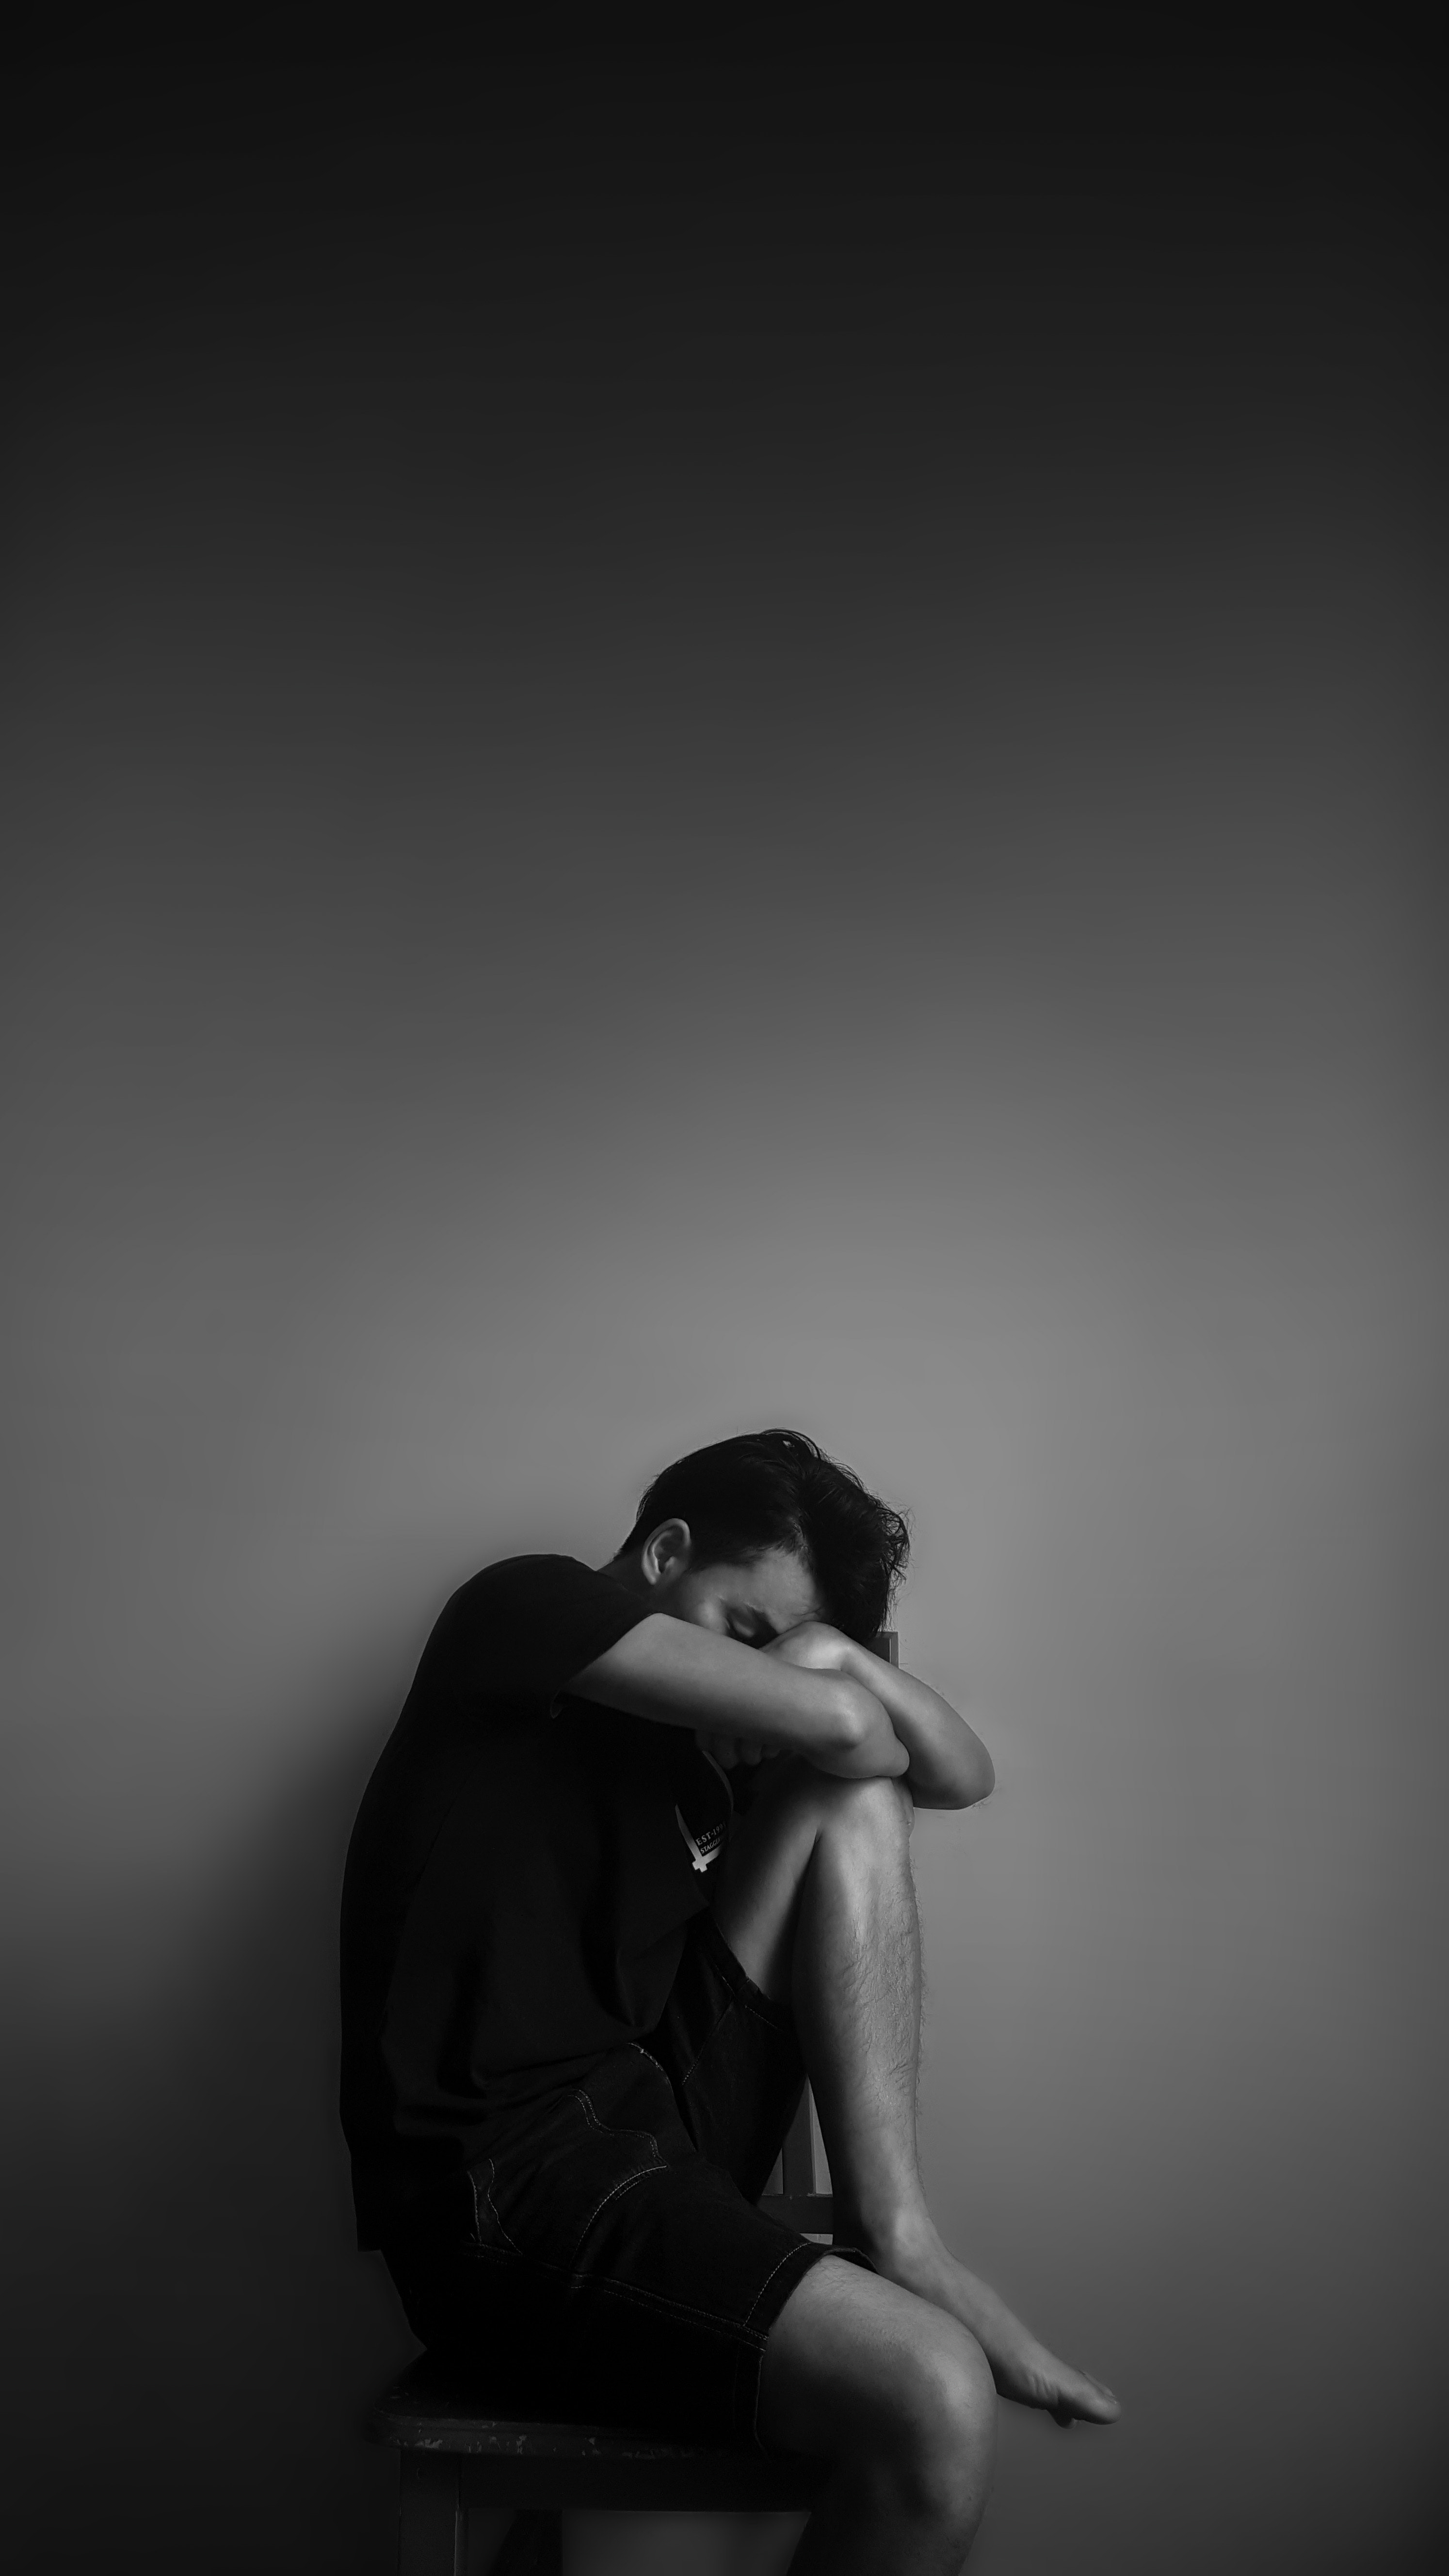 Grayscale Photography of Man Sitting Beside Wall, Adult, Man, Side view, Sad, HQ Photo